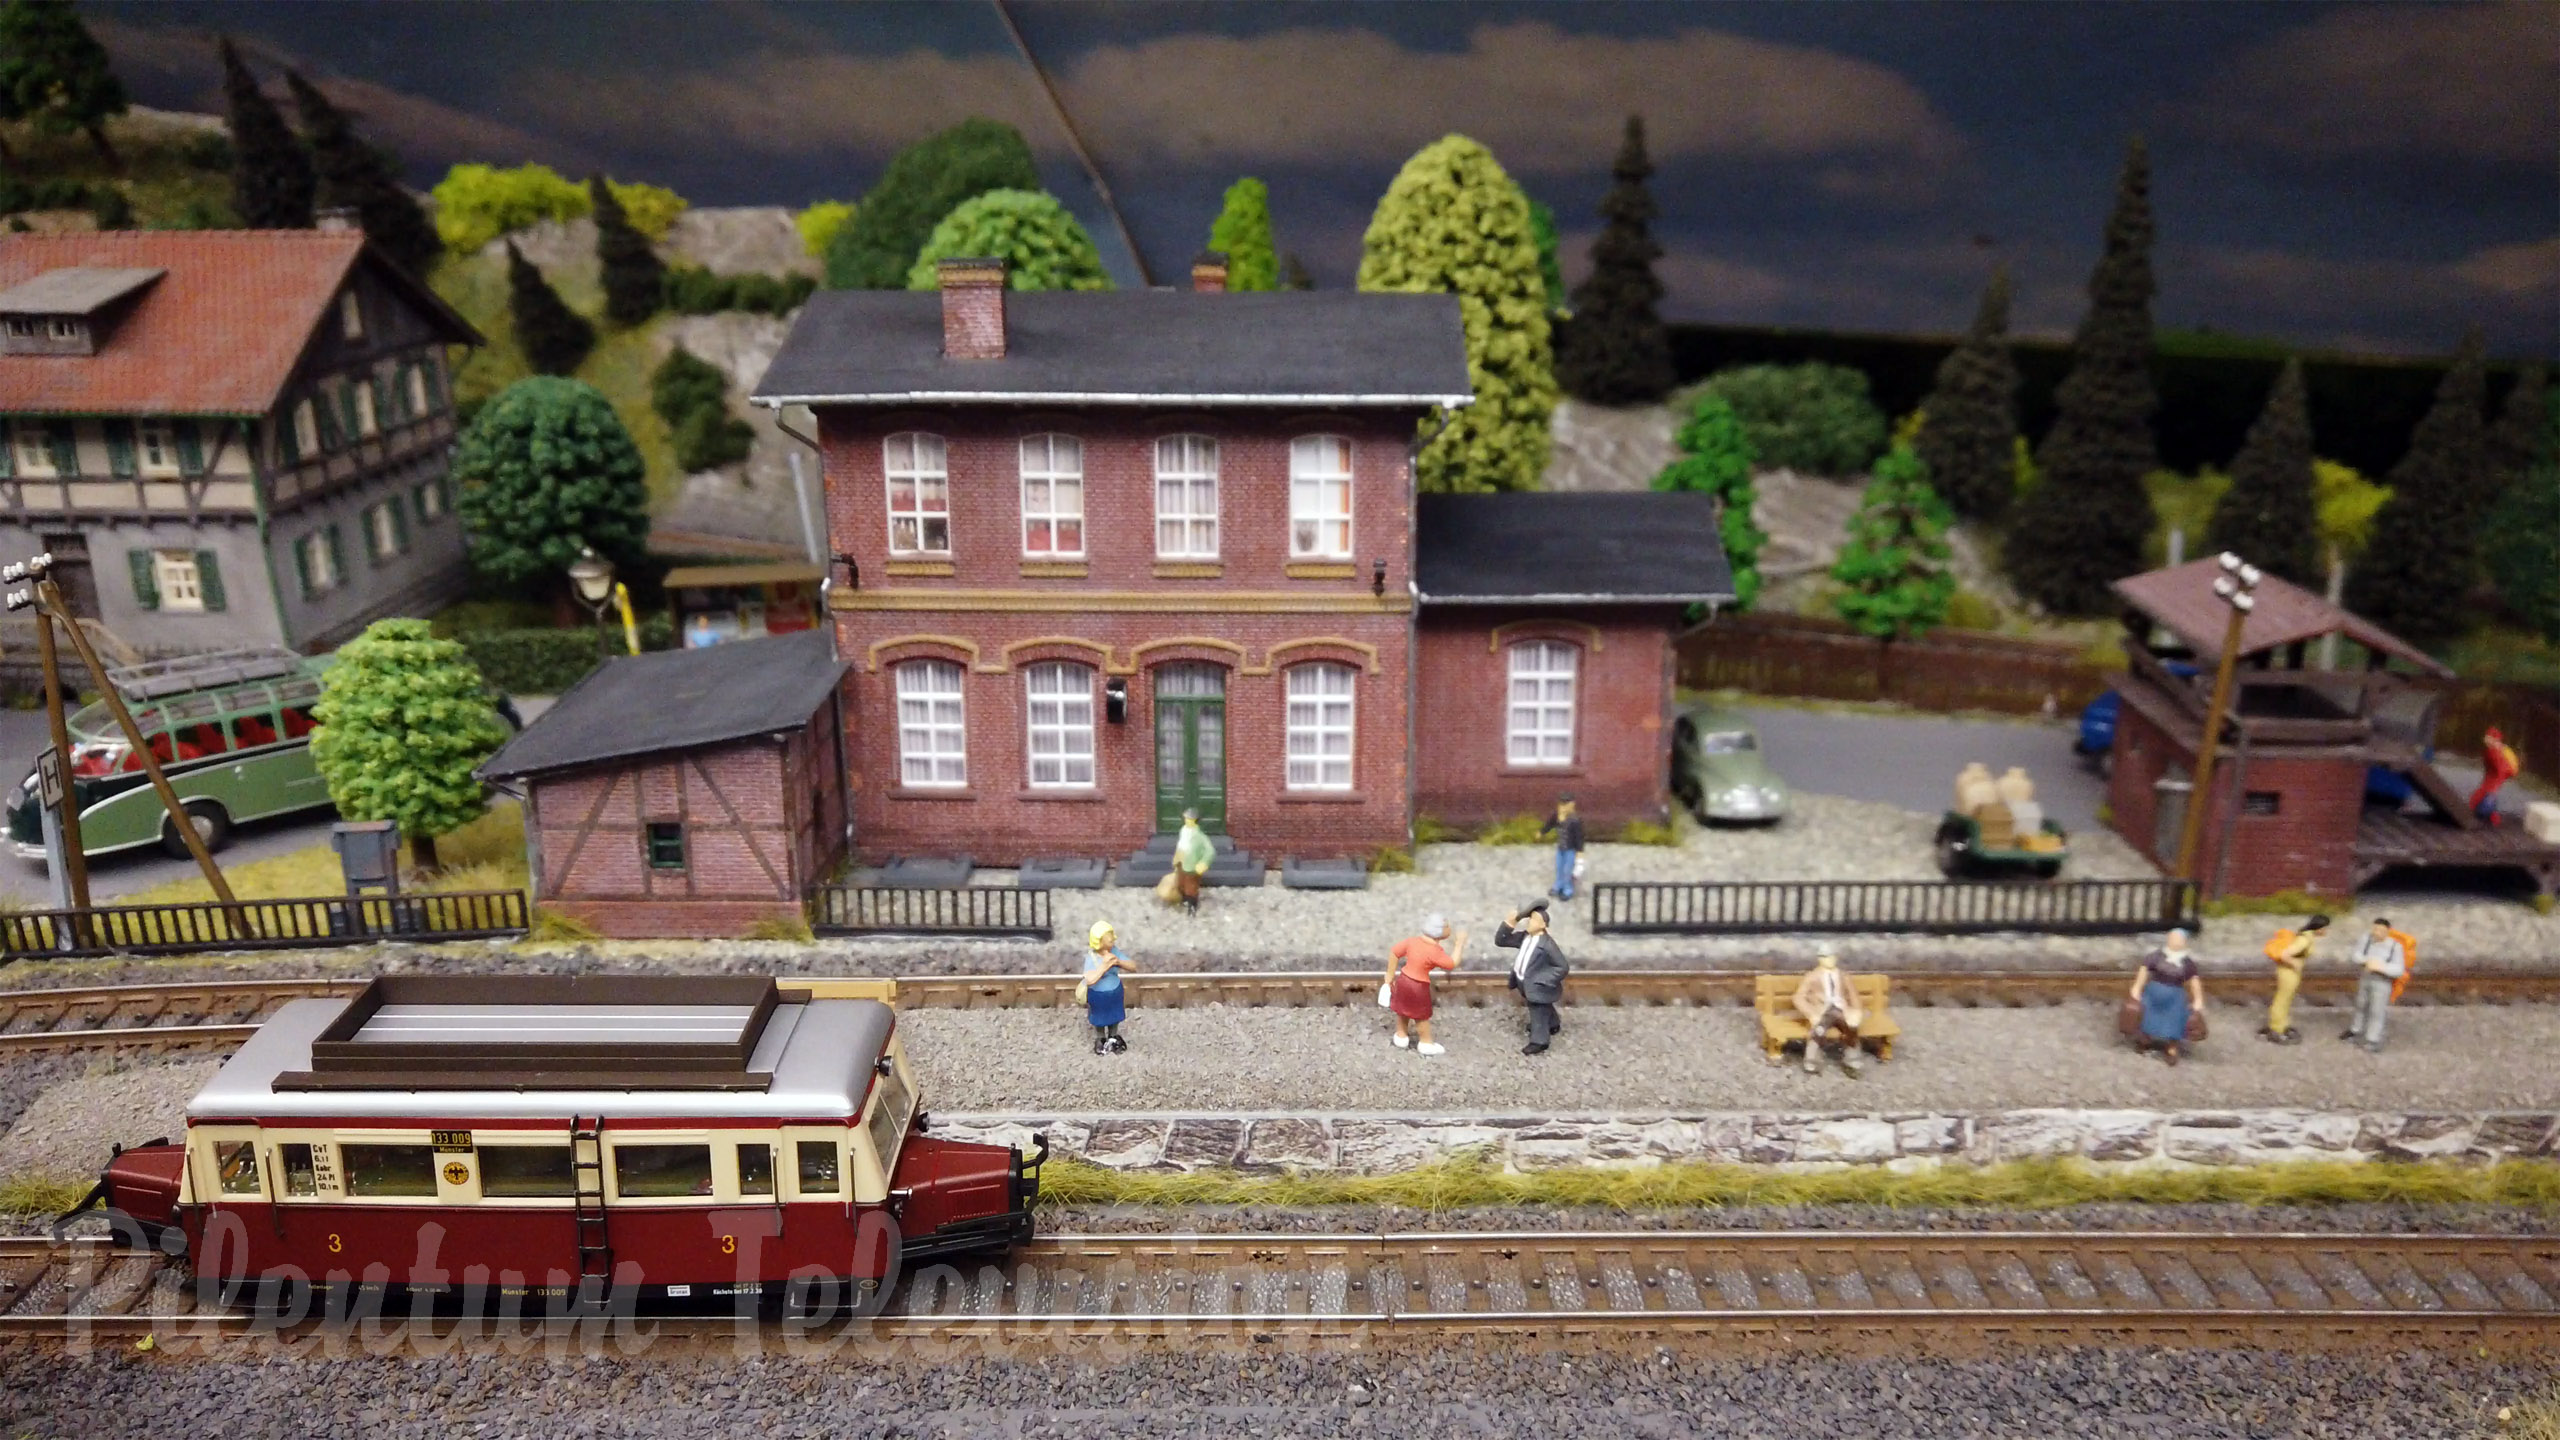 HO Scale Steam Locomotive Model Railway Layout with Thousands of Details (Germany)